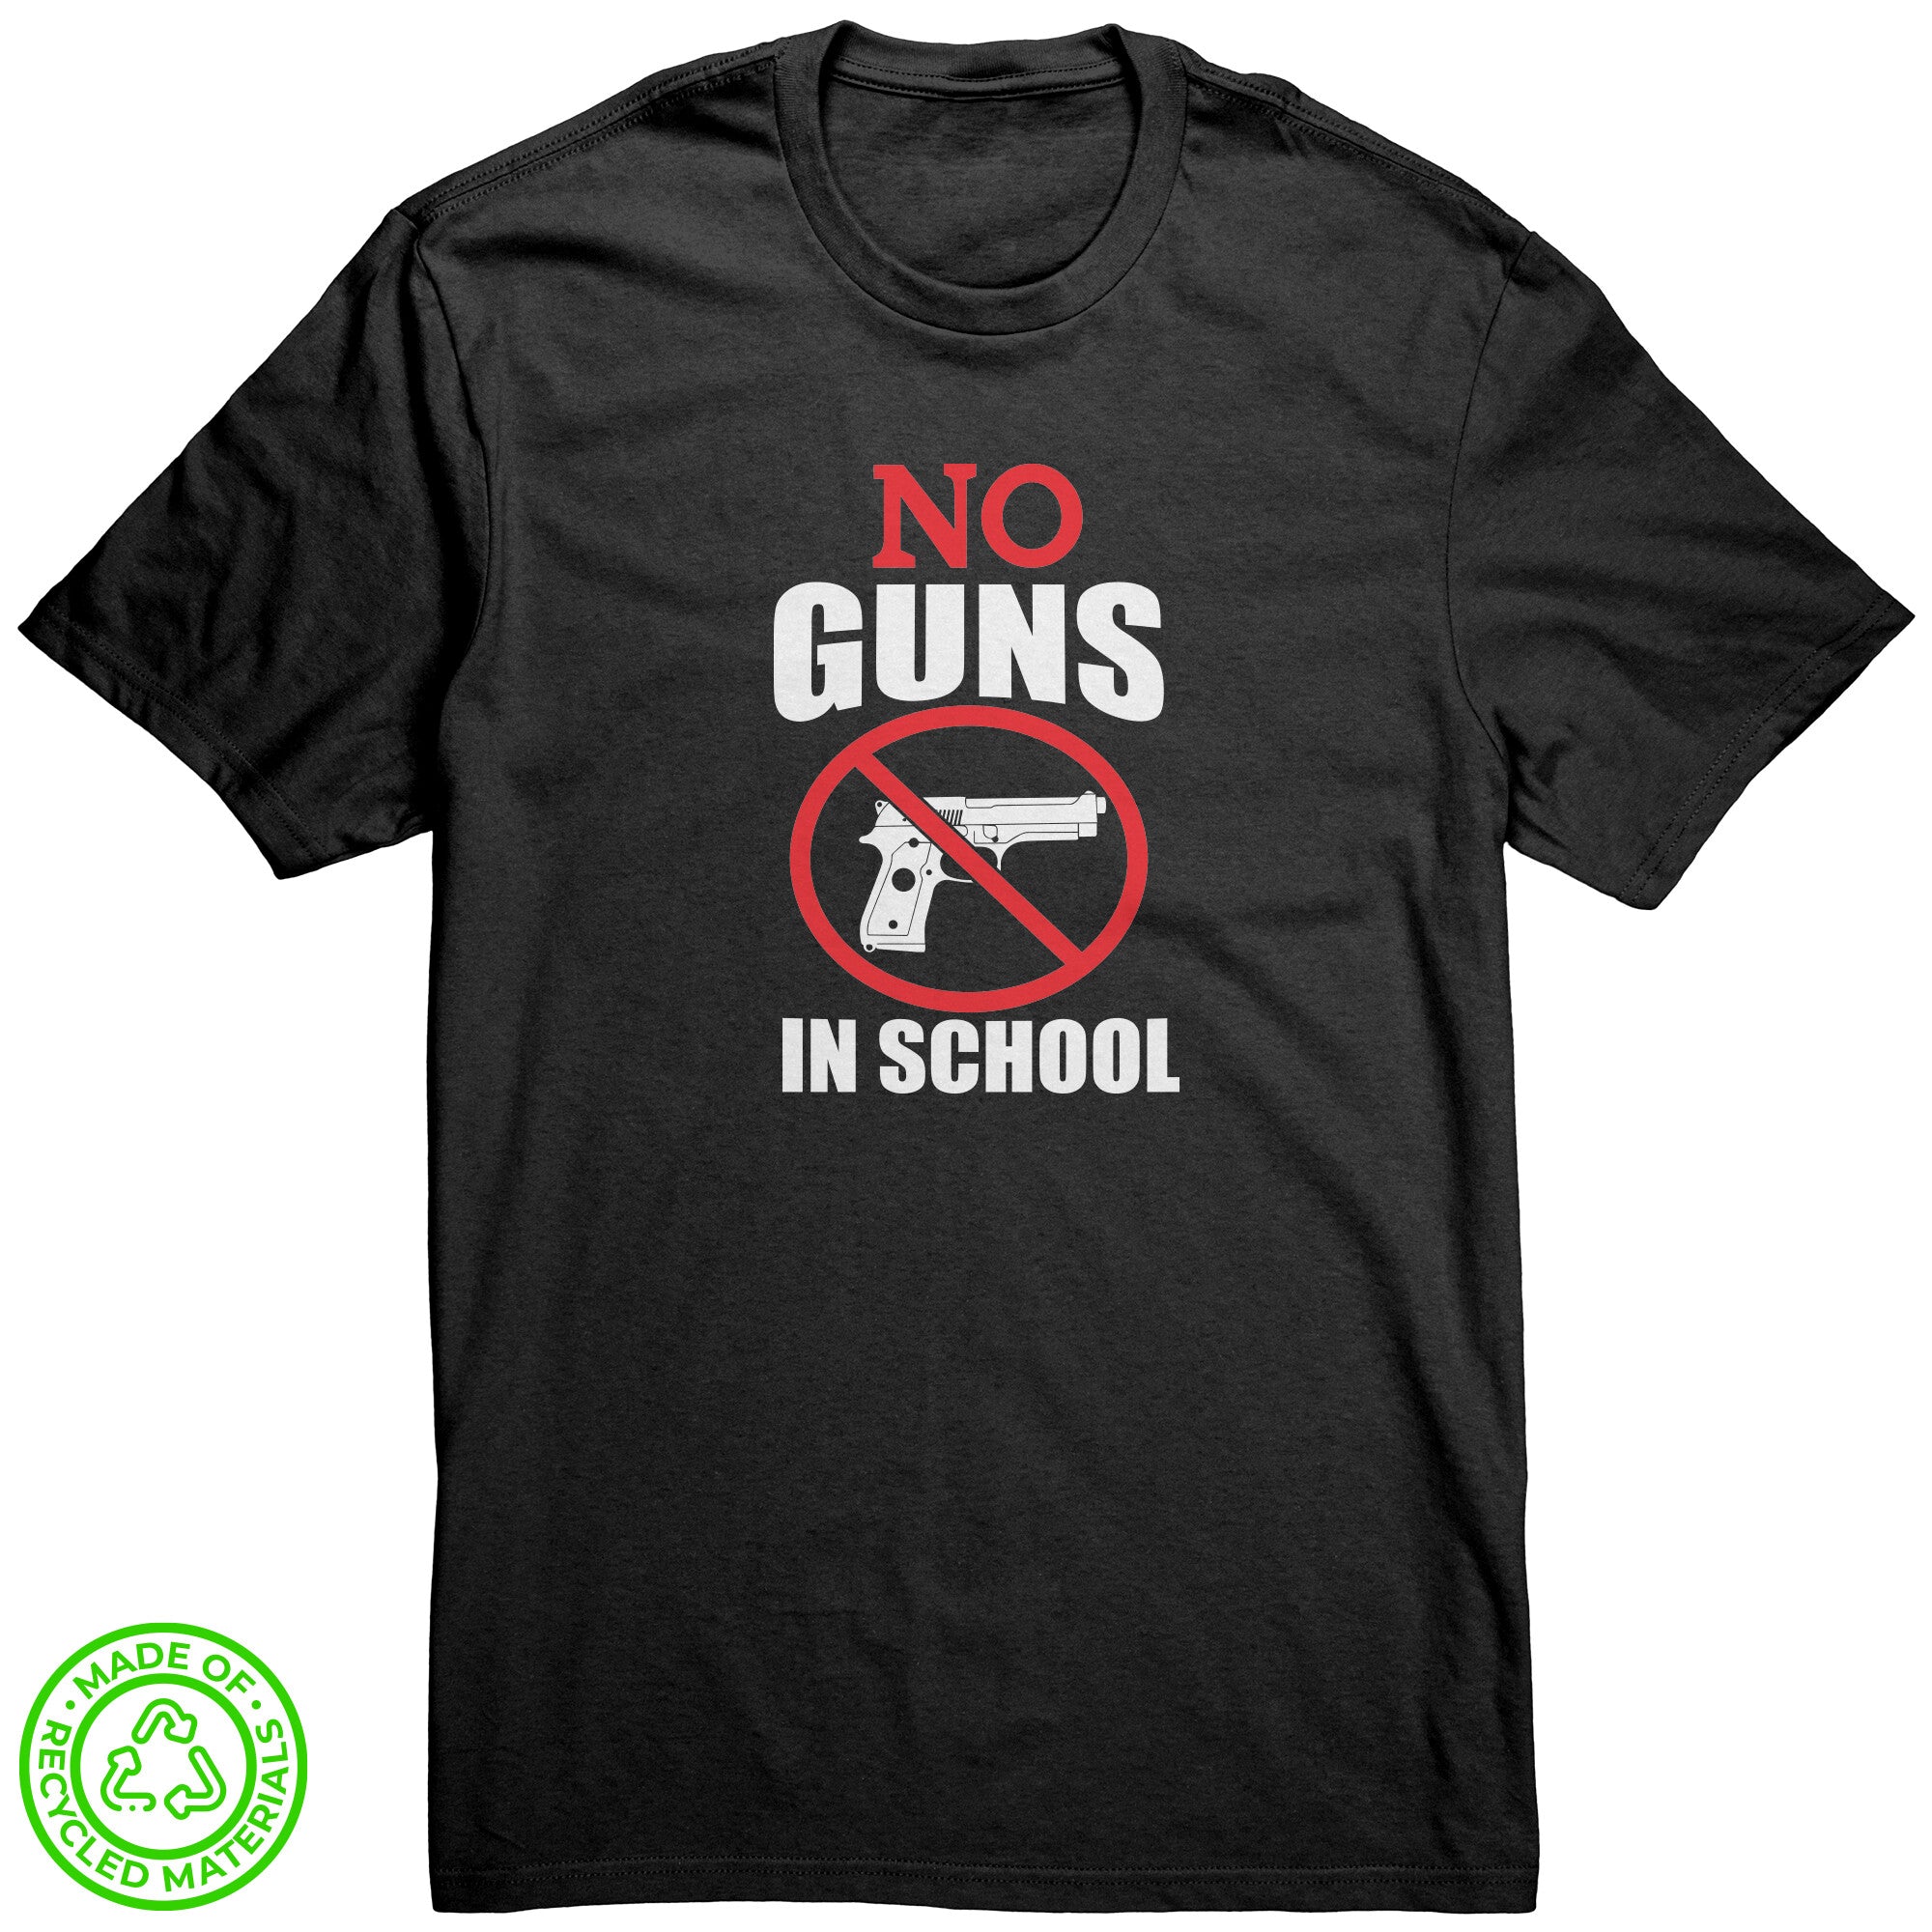 No Guns in School 100% Recycled Protest T-Shirt